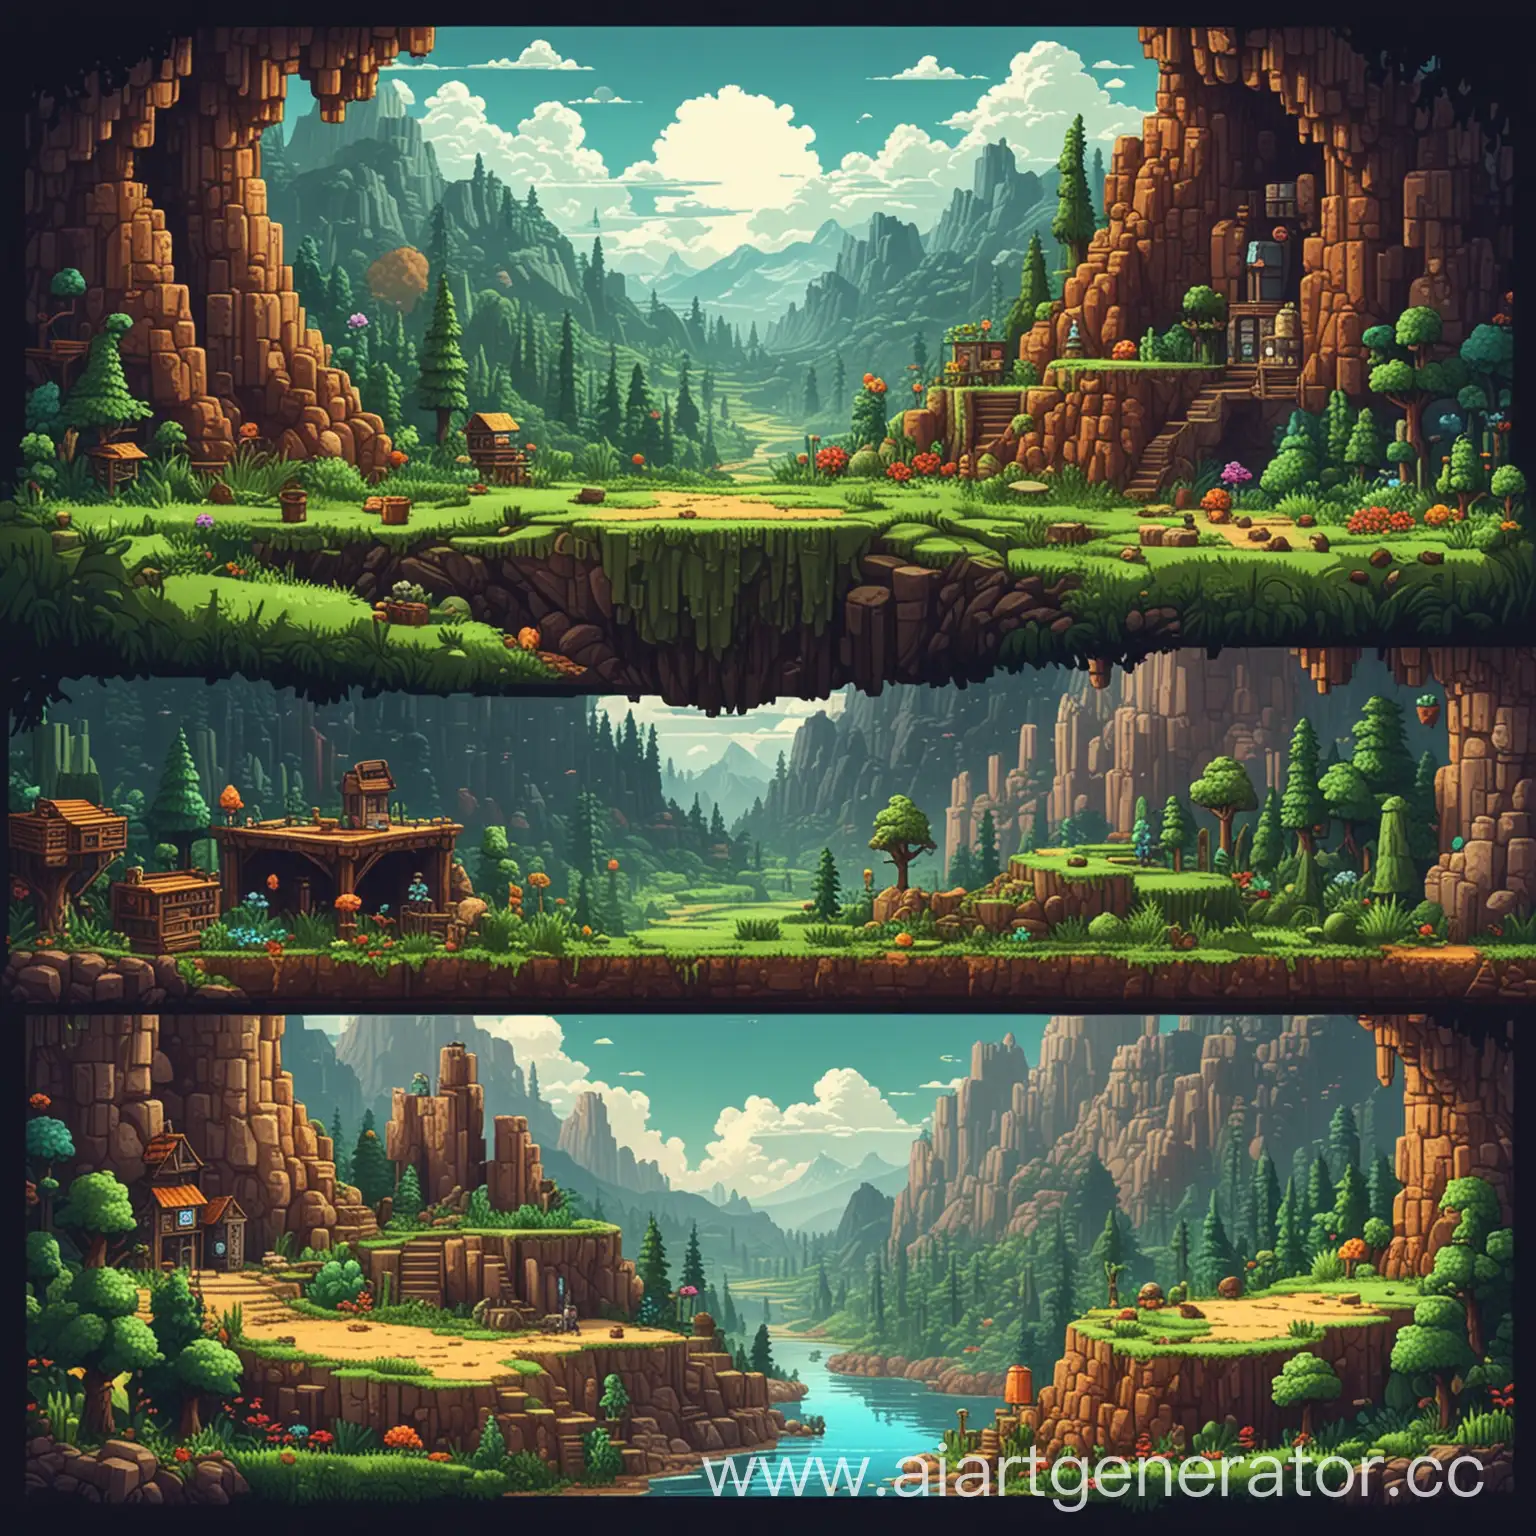 Create a 2000x500 pixel banner for a 2D pixel art game called 'Pixel Dream'. The banner should feature a landscape with smooth hills and plains, reminiscent of the game Terraria. The top layer should have grass-covered blocks, and underneath should be plain dirt blocks. Include elements such as trees, bushes, and caves to add variety to the scene. Add a character using a tool, interacting with the environment, and a few enemies for a sense of adventure. Place the game's title, 'Pixel Dream', in a pixel art font prominently in the center or left side of the banner. Use a bright and colorful palette to make the scene vibrant and engaging.